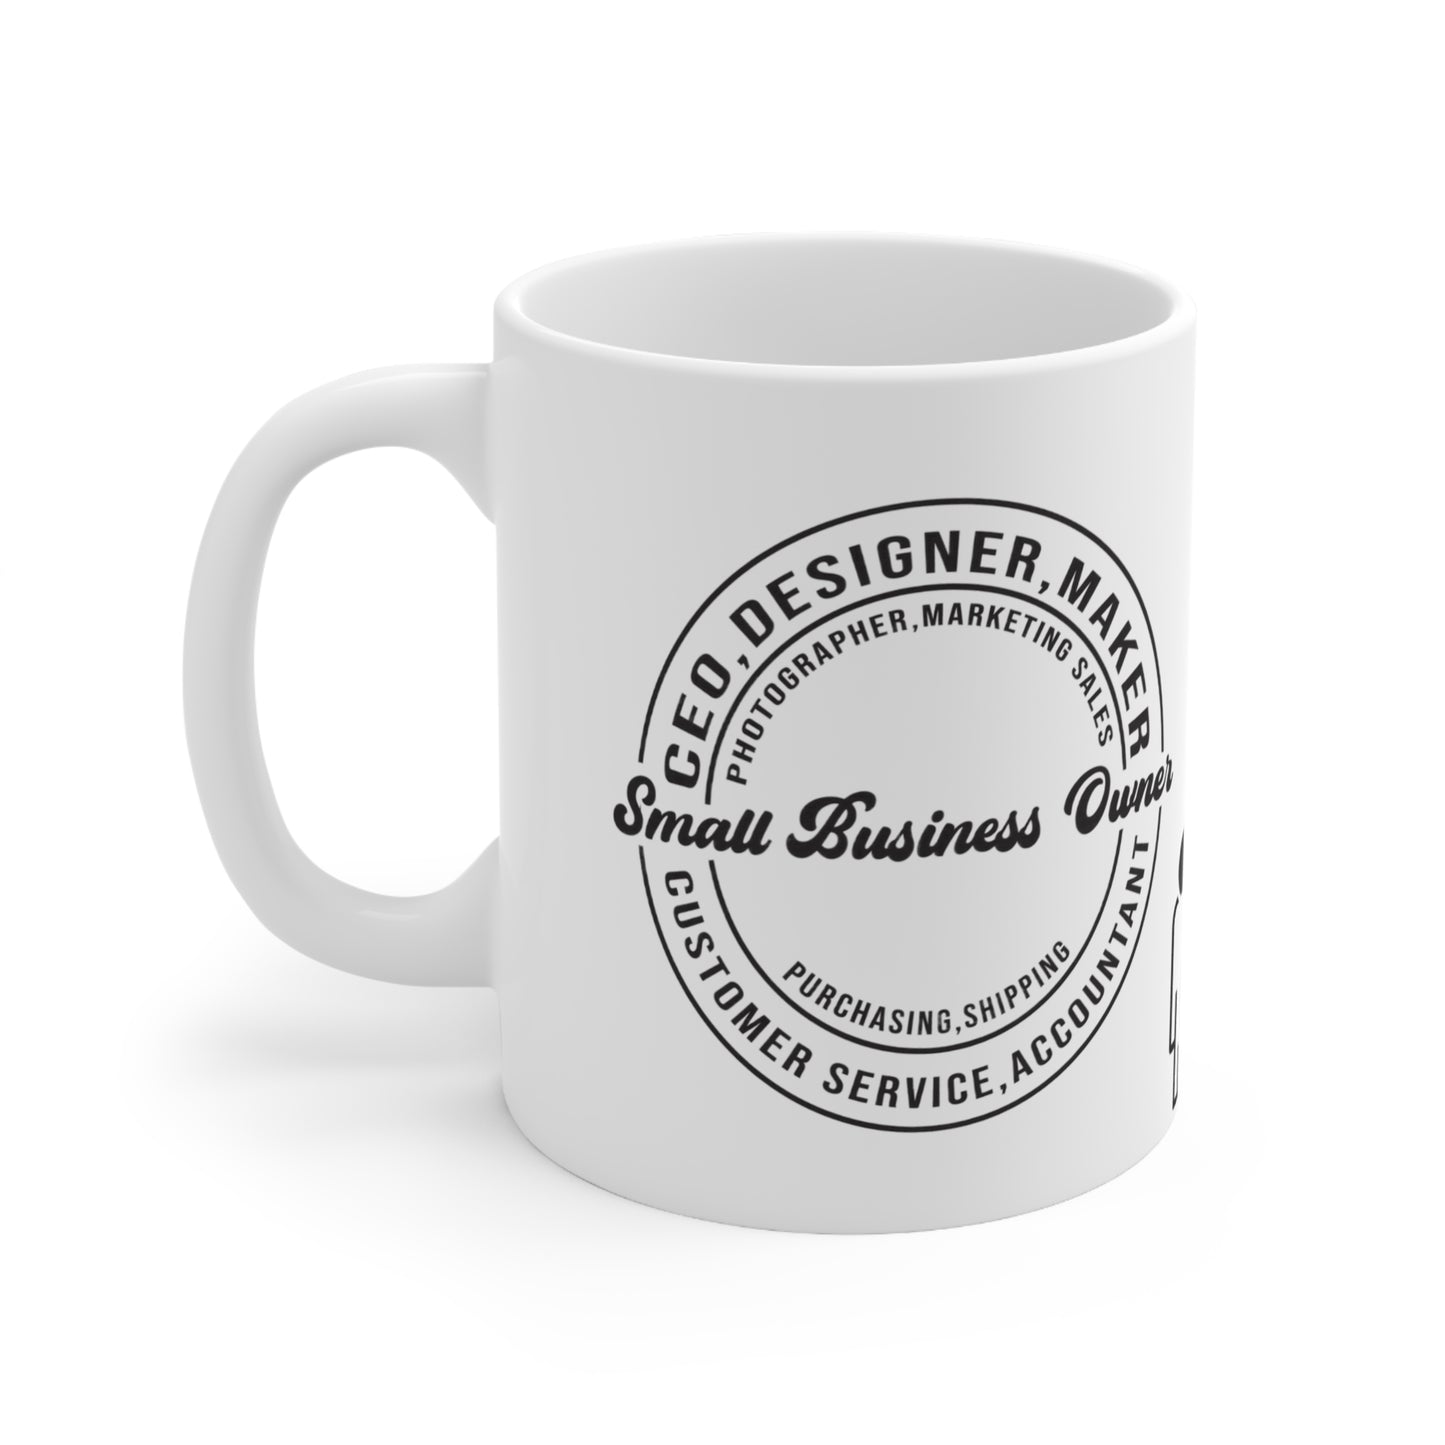 SMALL BUSINESS OWNER MUG - White - MUSGCITY - Free Shipping